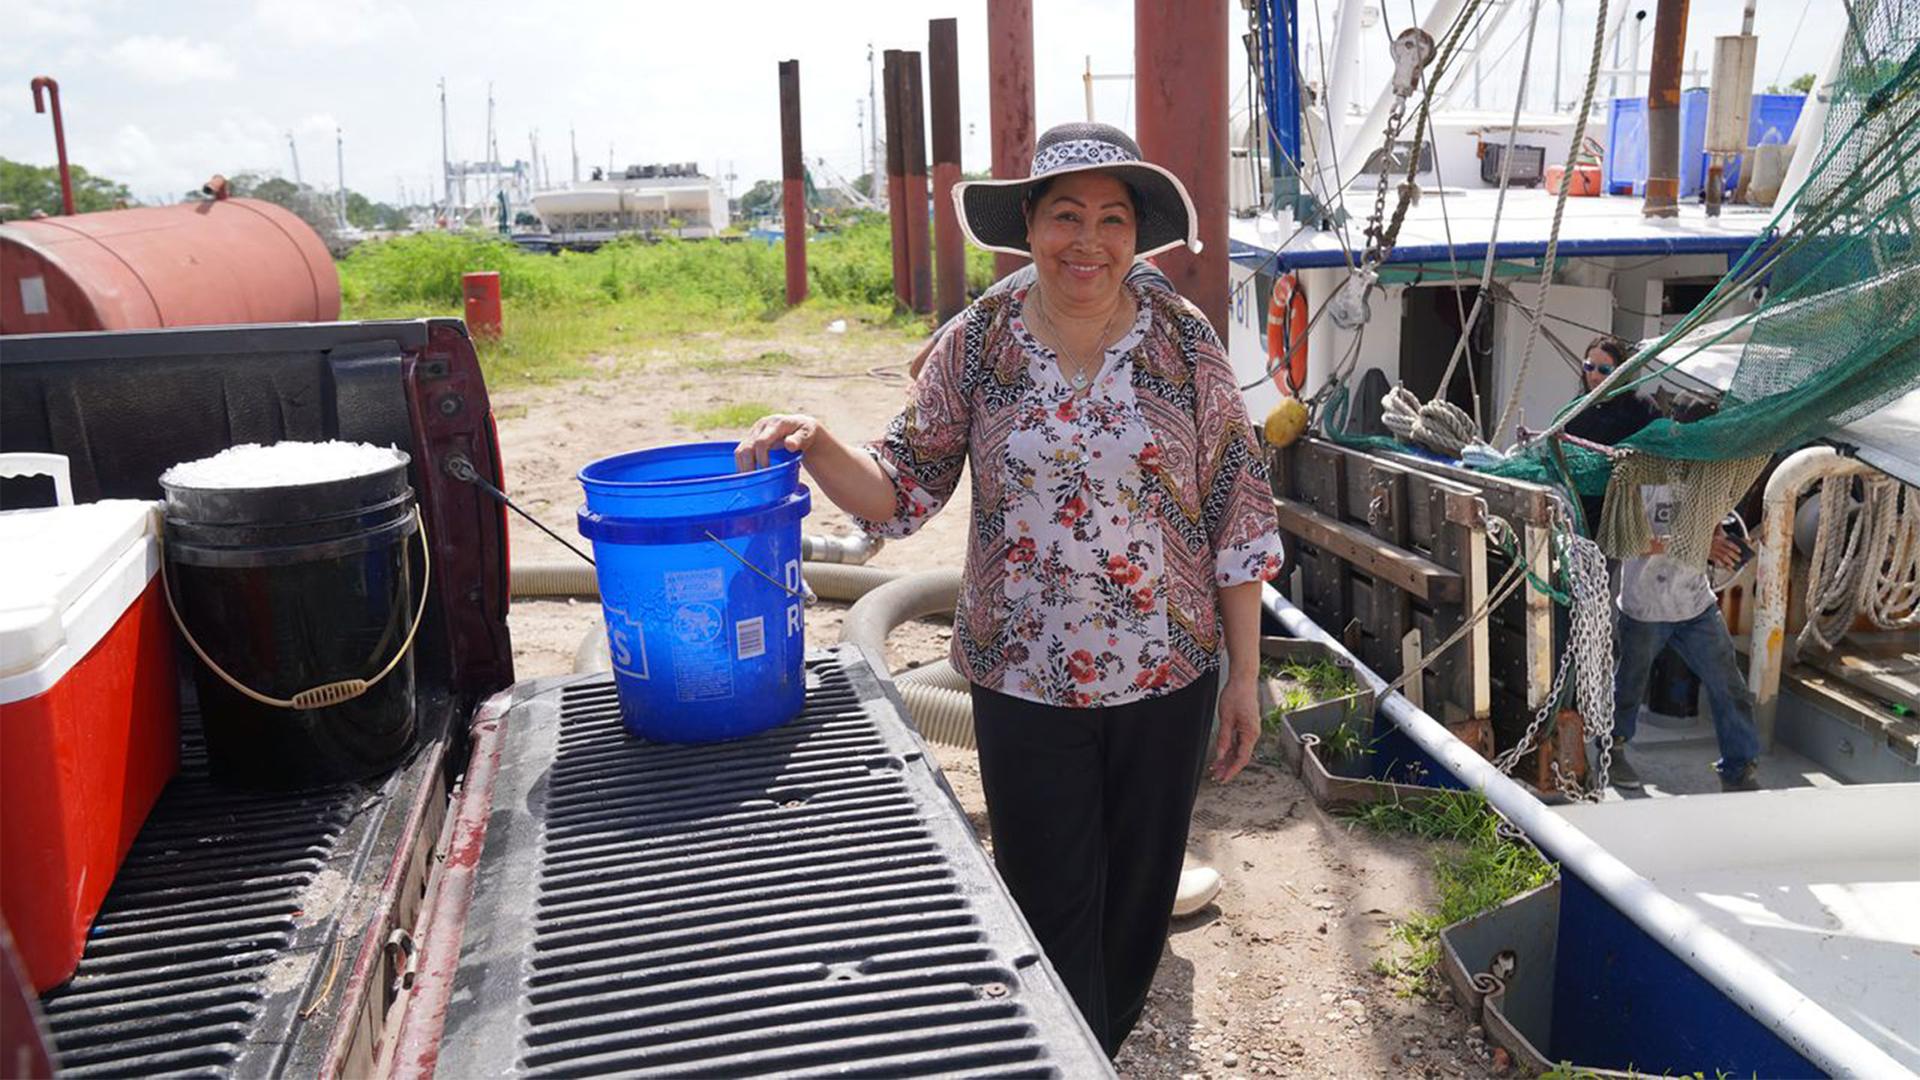 A woman wearing a hat stands next to a blue bucket